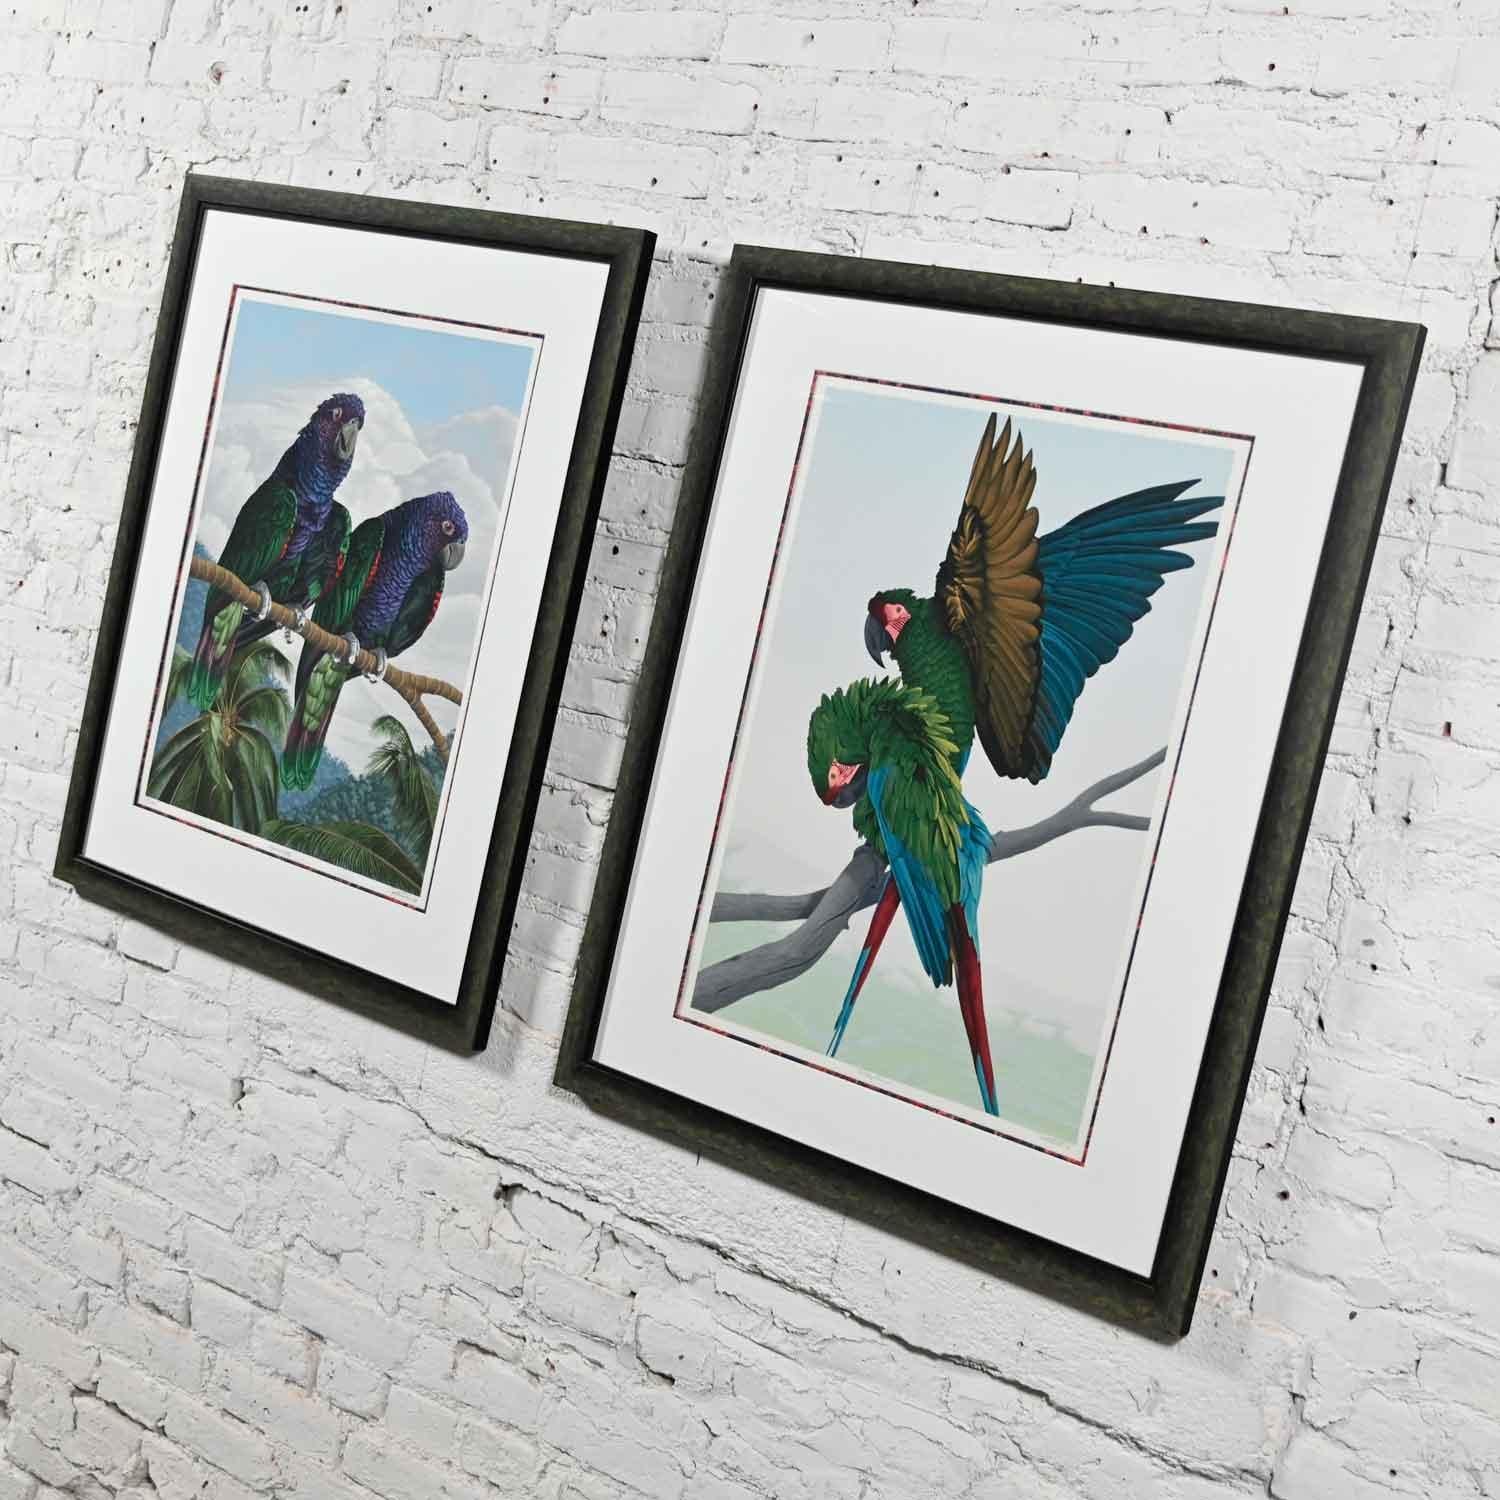 Dallas John Limited Edition Signed Imperial Mates & Military Macaws Serigraph In Good Condition For Sale In Topeka, KS